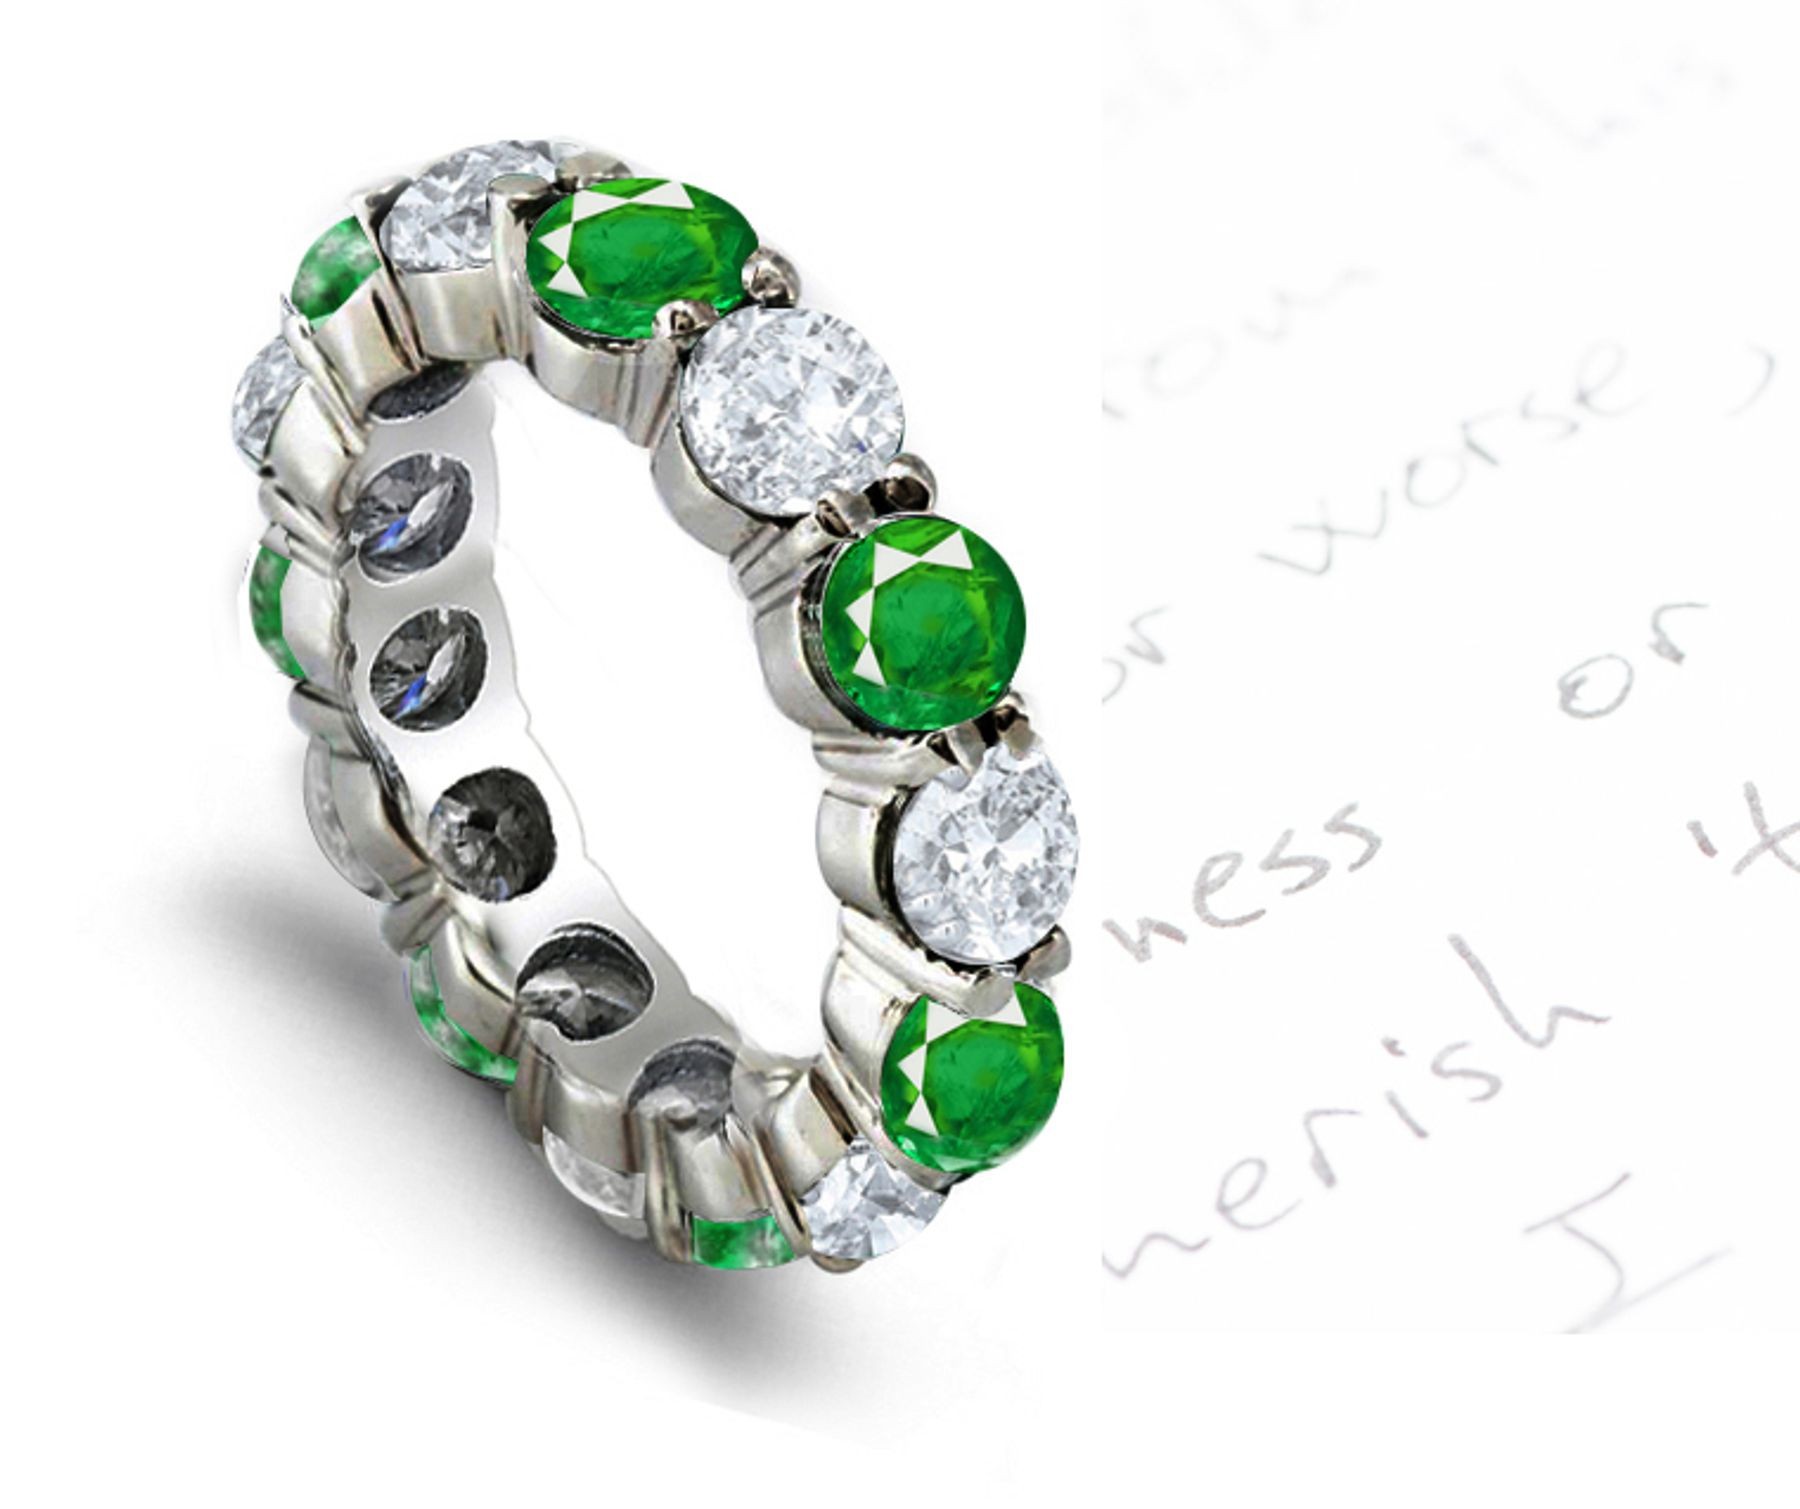 Distinctive Qualities: In Stock Prong Set Brilliant Cut Round Emerald & Diamond Eternity Ring in 1.0 to 5.0 carats